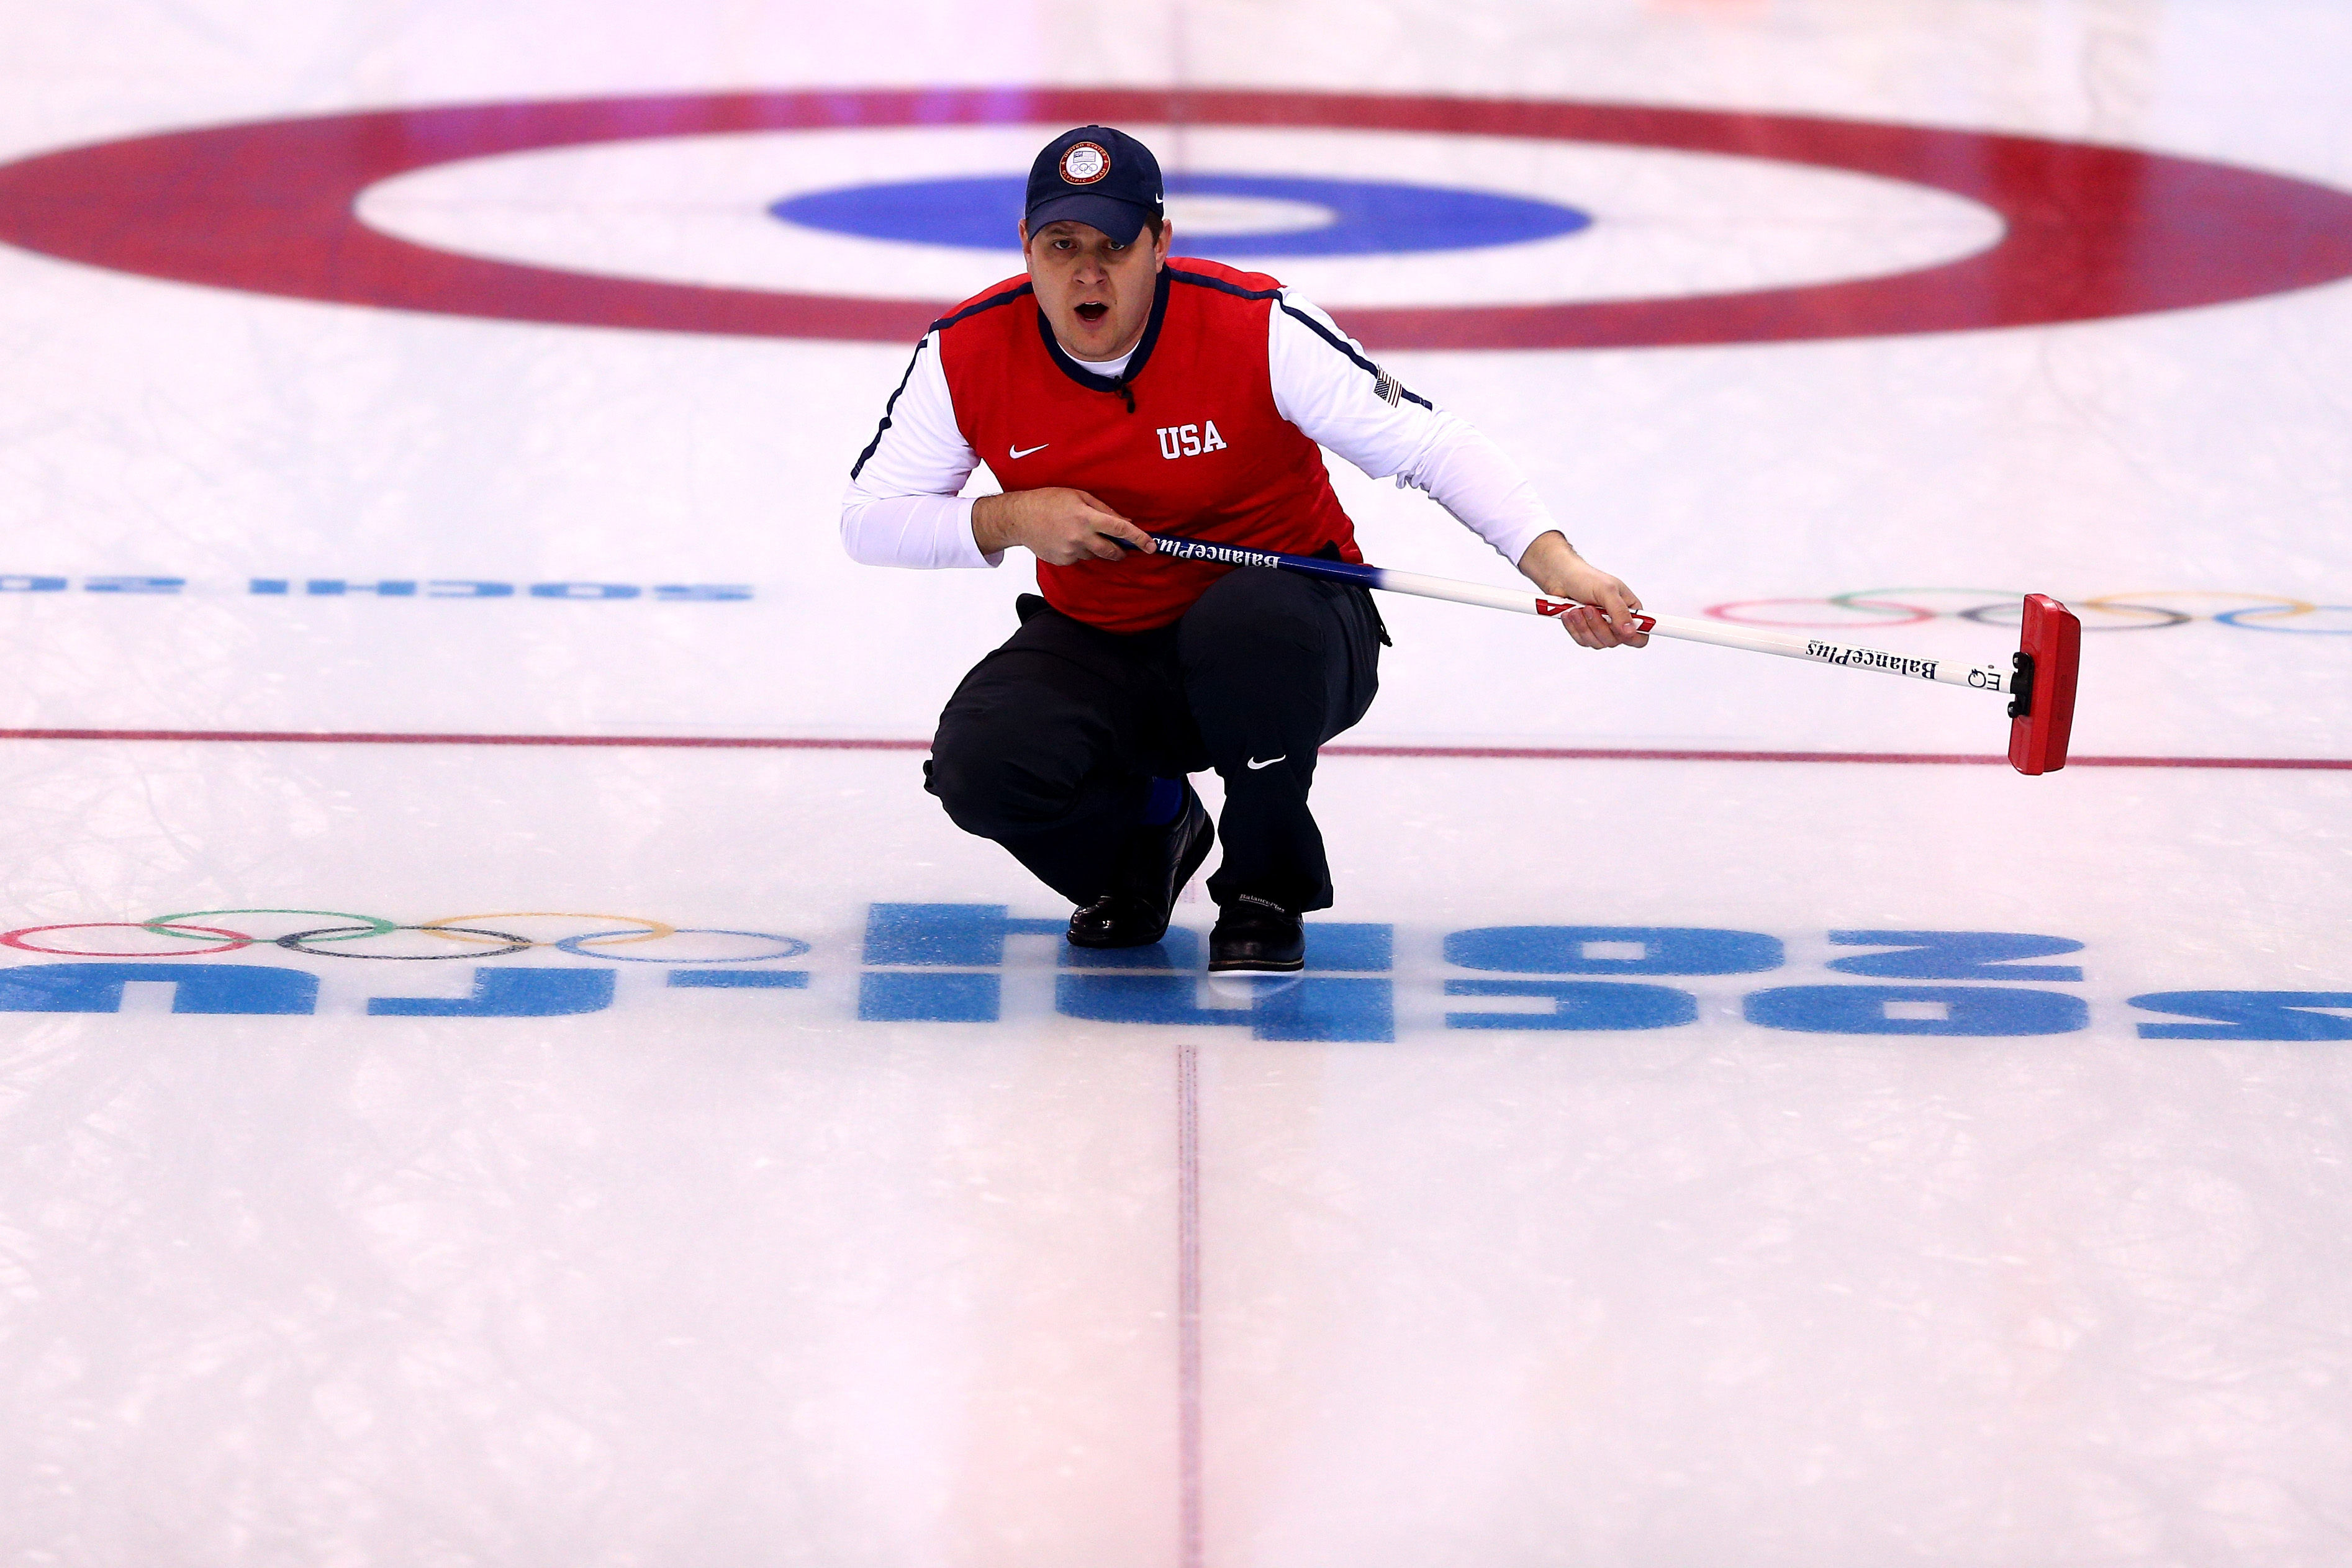 John Shuster of United States looks on during the Curling Men's Round Robin match on day 9 of the Sochi 2014 Winter Olympics at Ice Cube Curling Center on February 16, 2014 in Sochi, Russia. Paul Gilham—Getty Images (Paul Gilham—Getty Images)